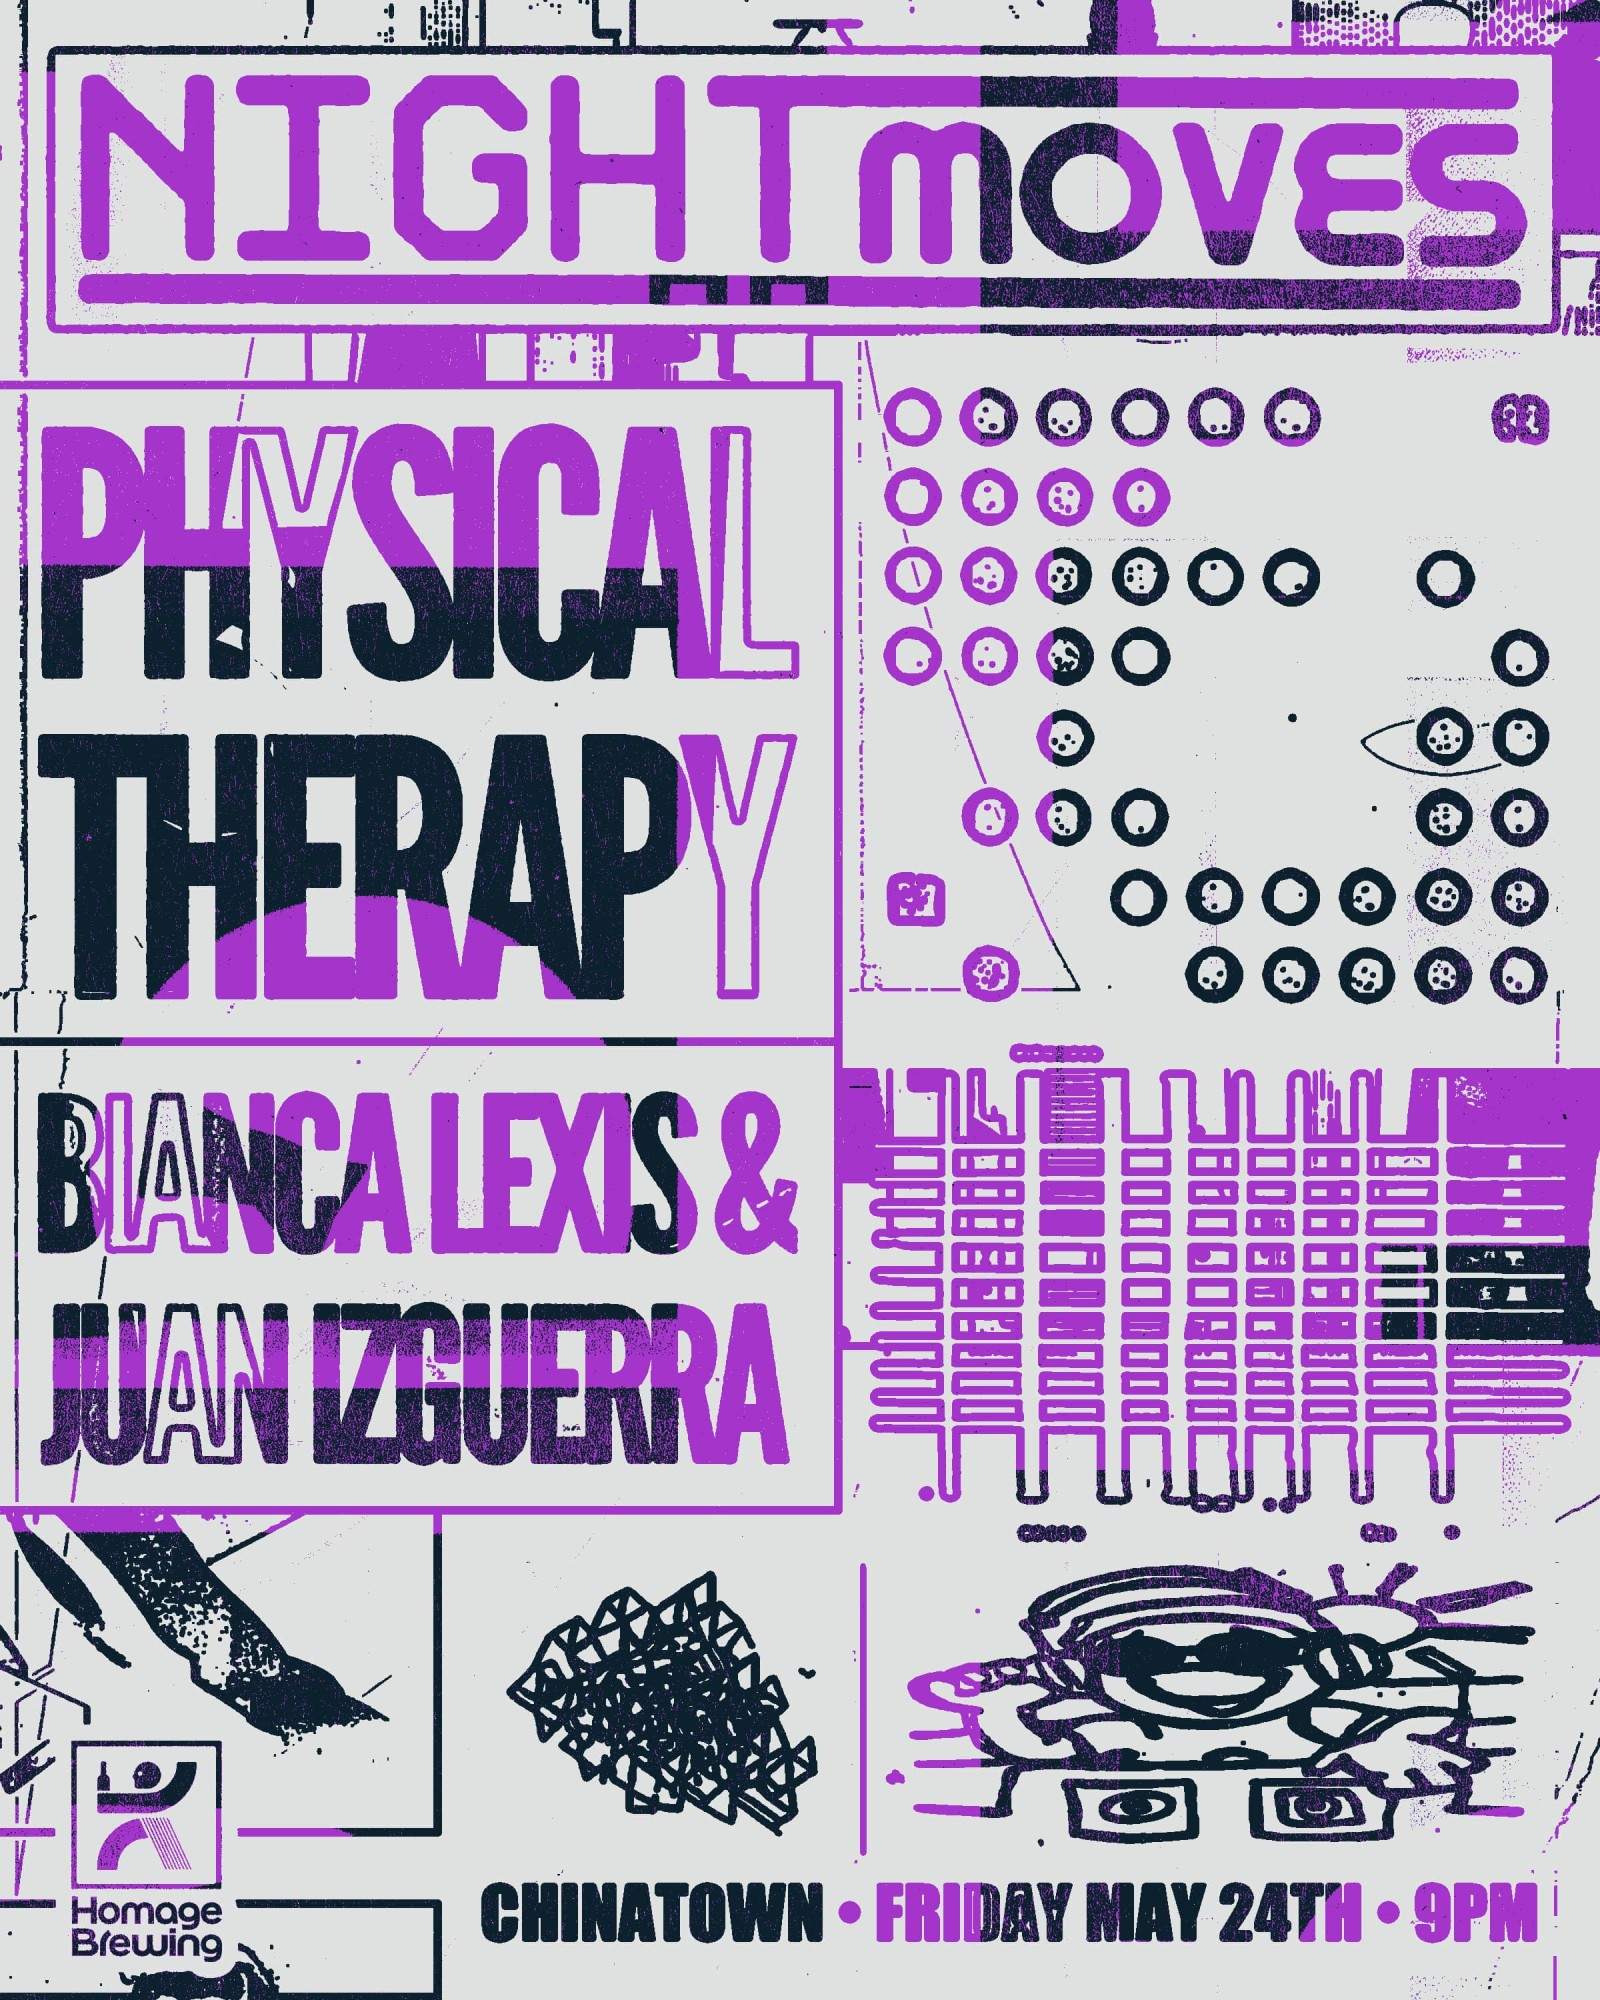 Night Moves with Physical Therapy, Bianca Lexis, and Juan Izguerra - フライヤー表